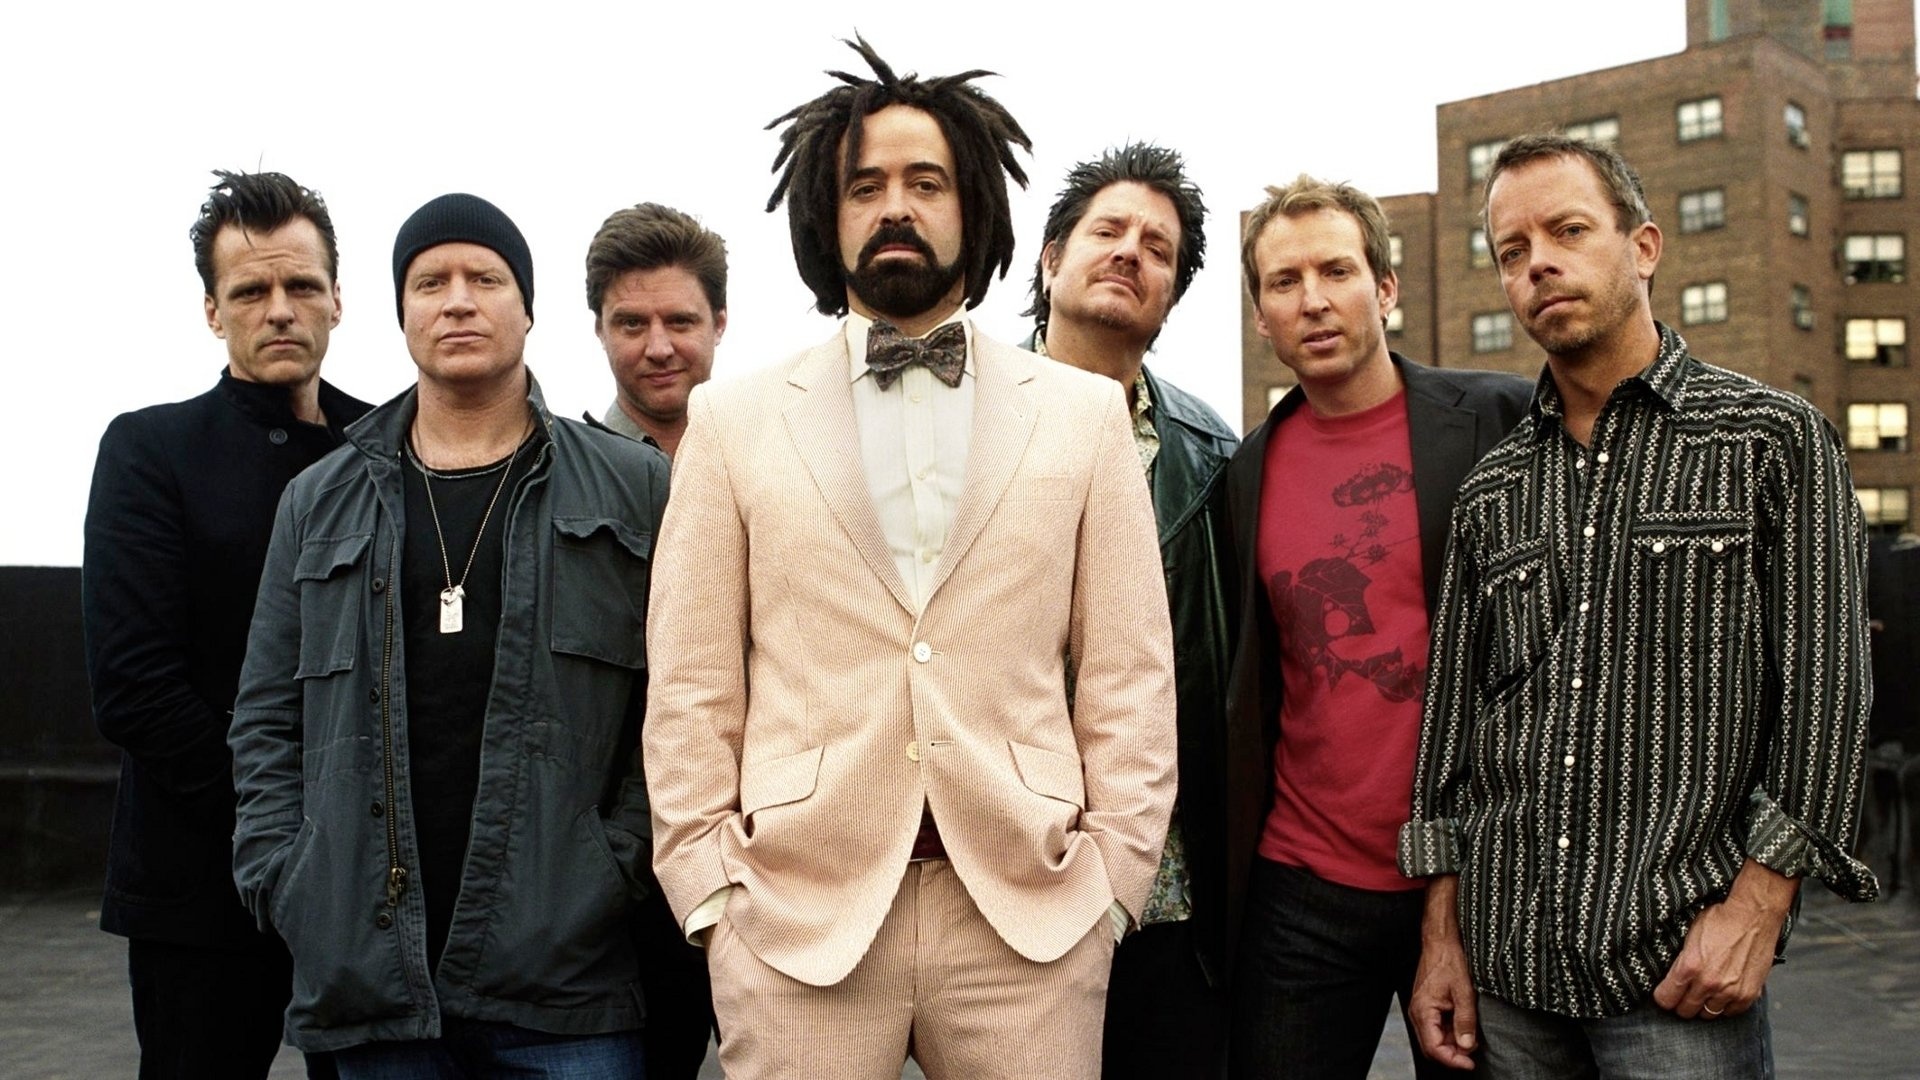 Adam Duritz, Counting Crows, HD wallpapers, Backgrounds, 1920x1080 Full HD Desktop